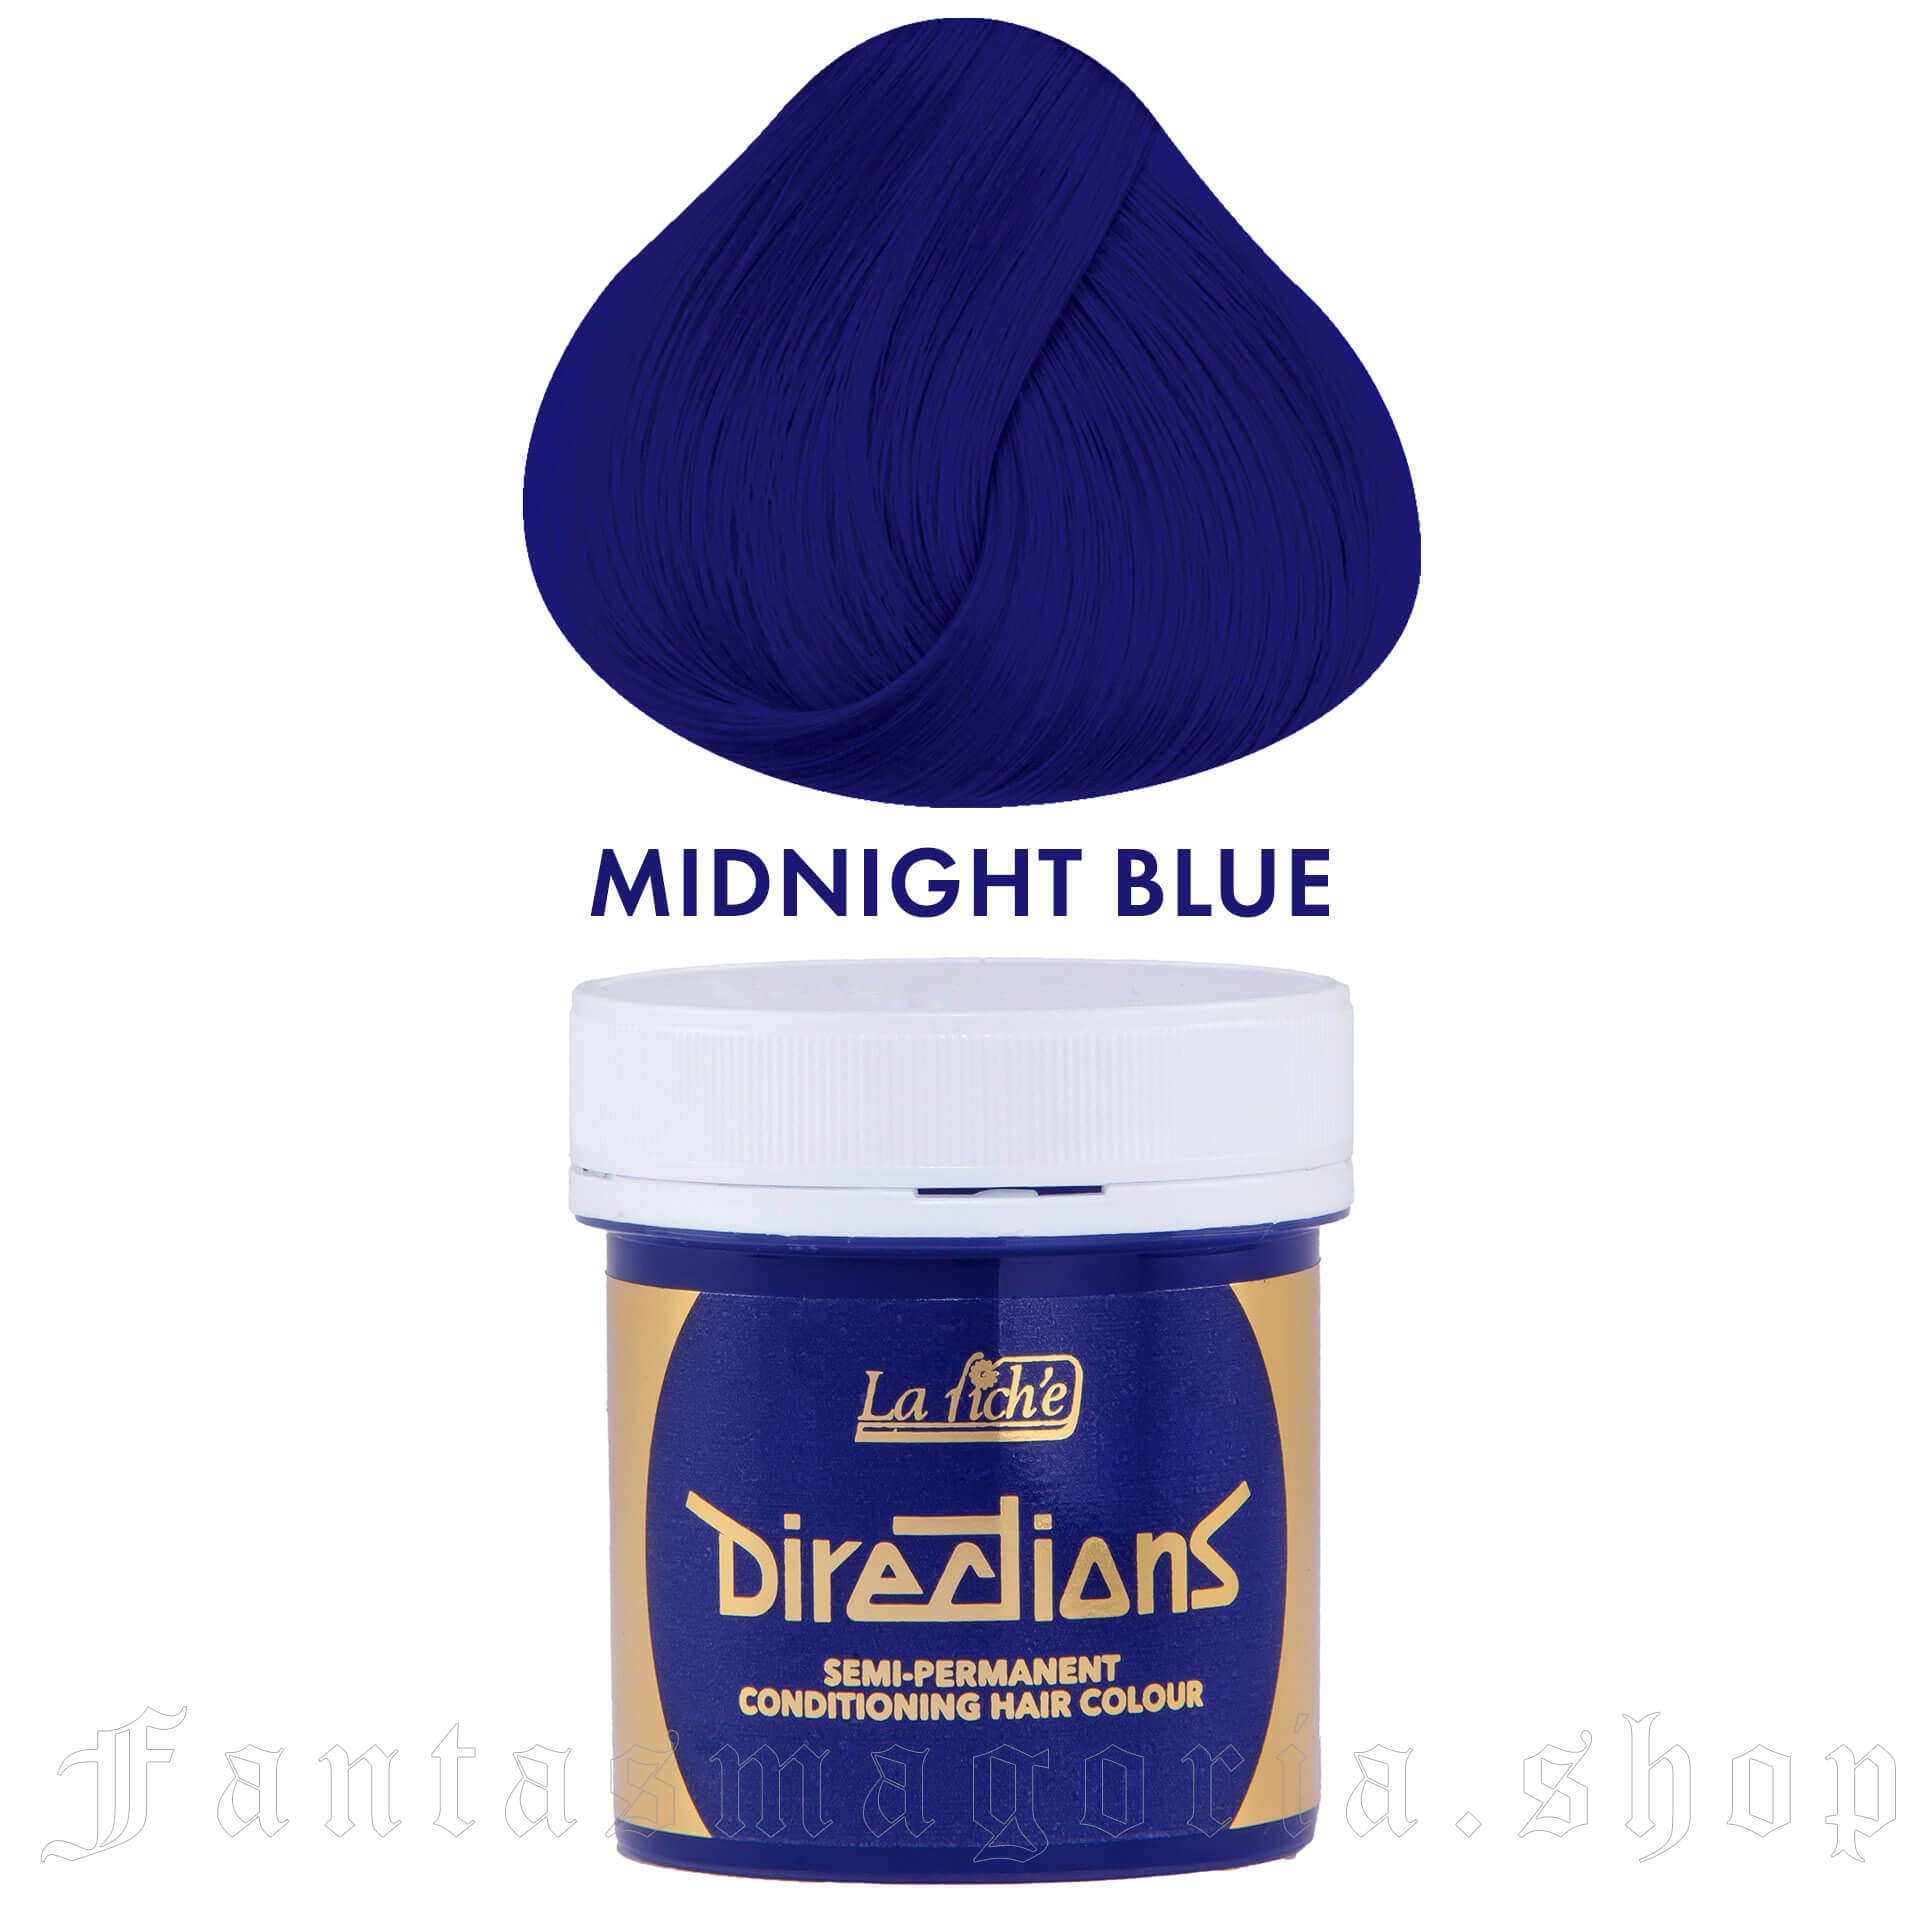 Midnight Blue Hair Coloring Balsam - Directions - DIRECTIONS/MIDNIGHT-BLUE 1